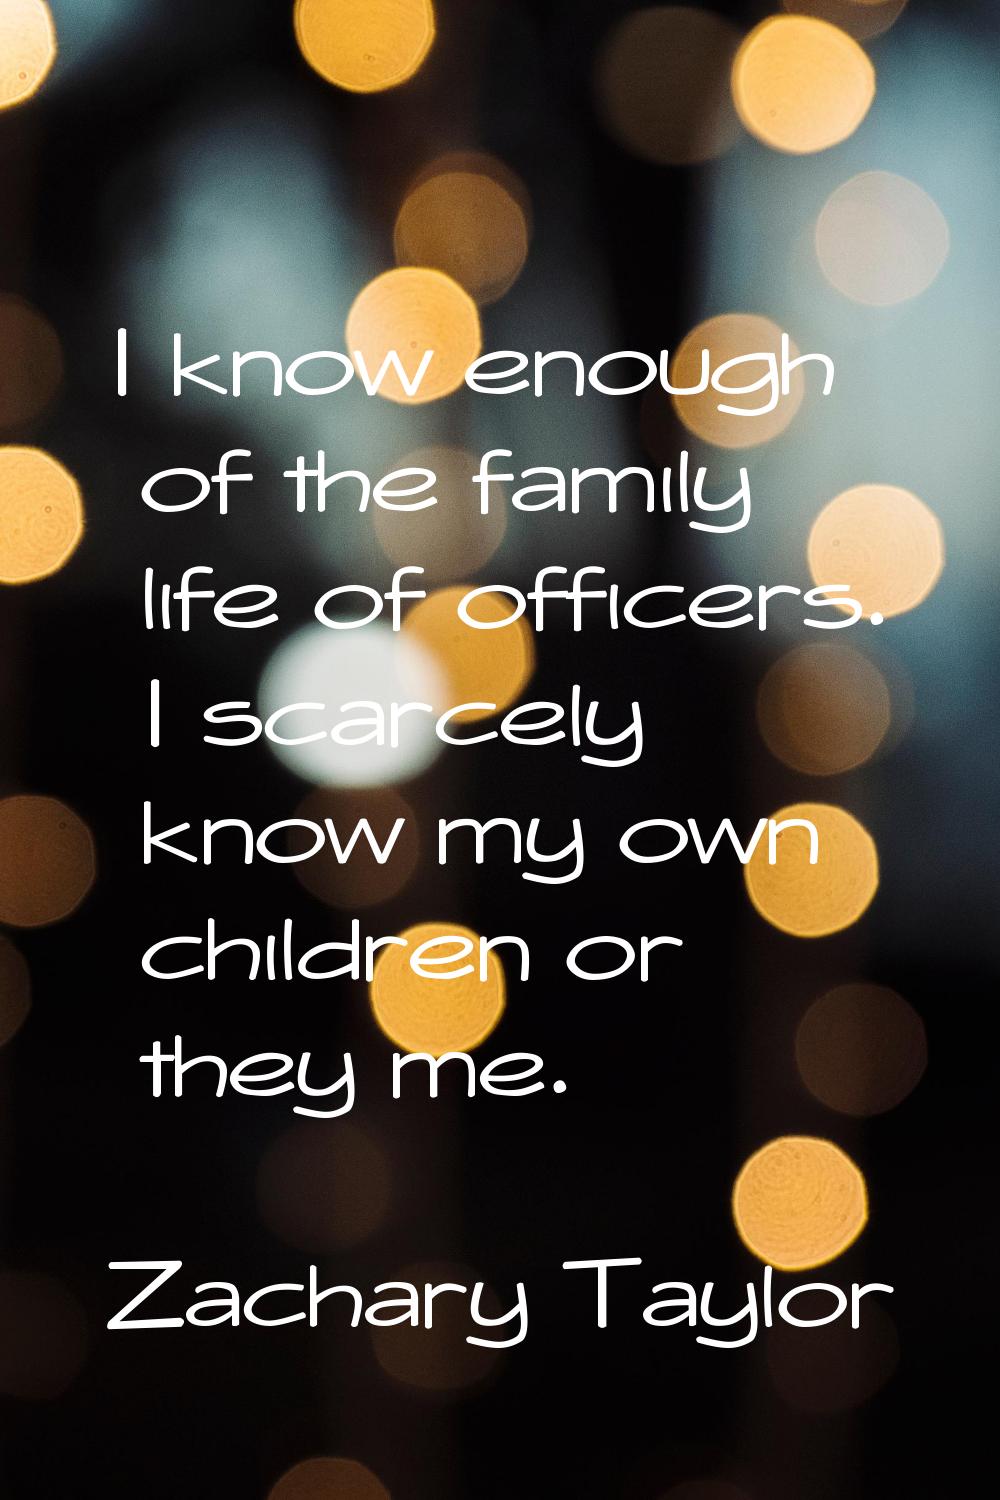 I know enough of the family life of officers. I scarcely know my own children or they me.